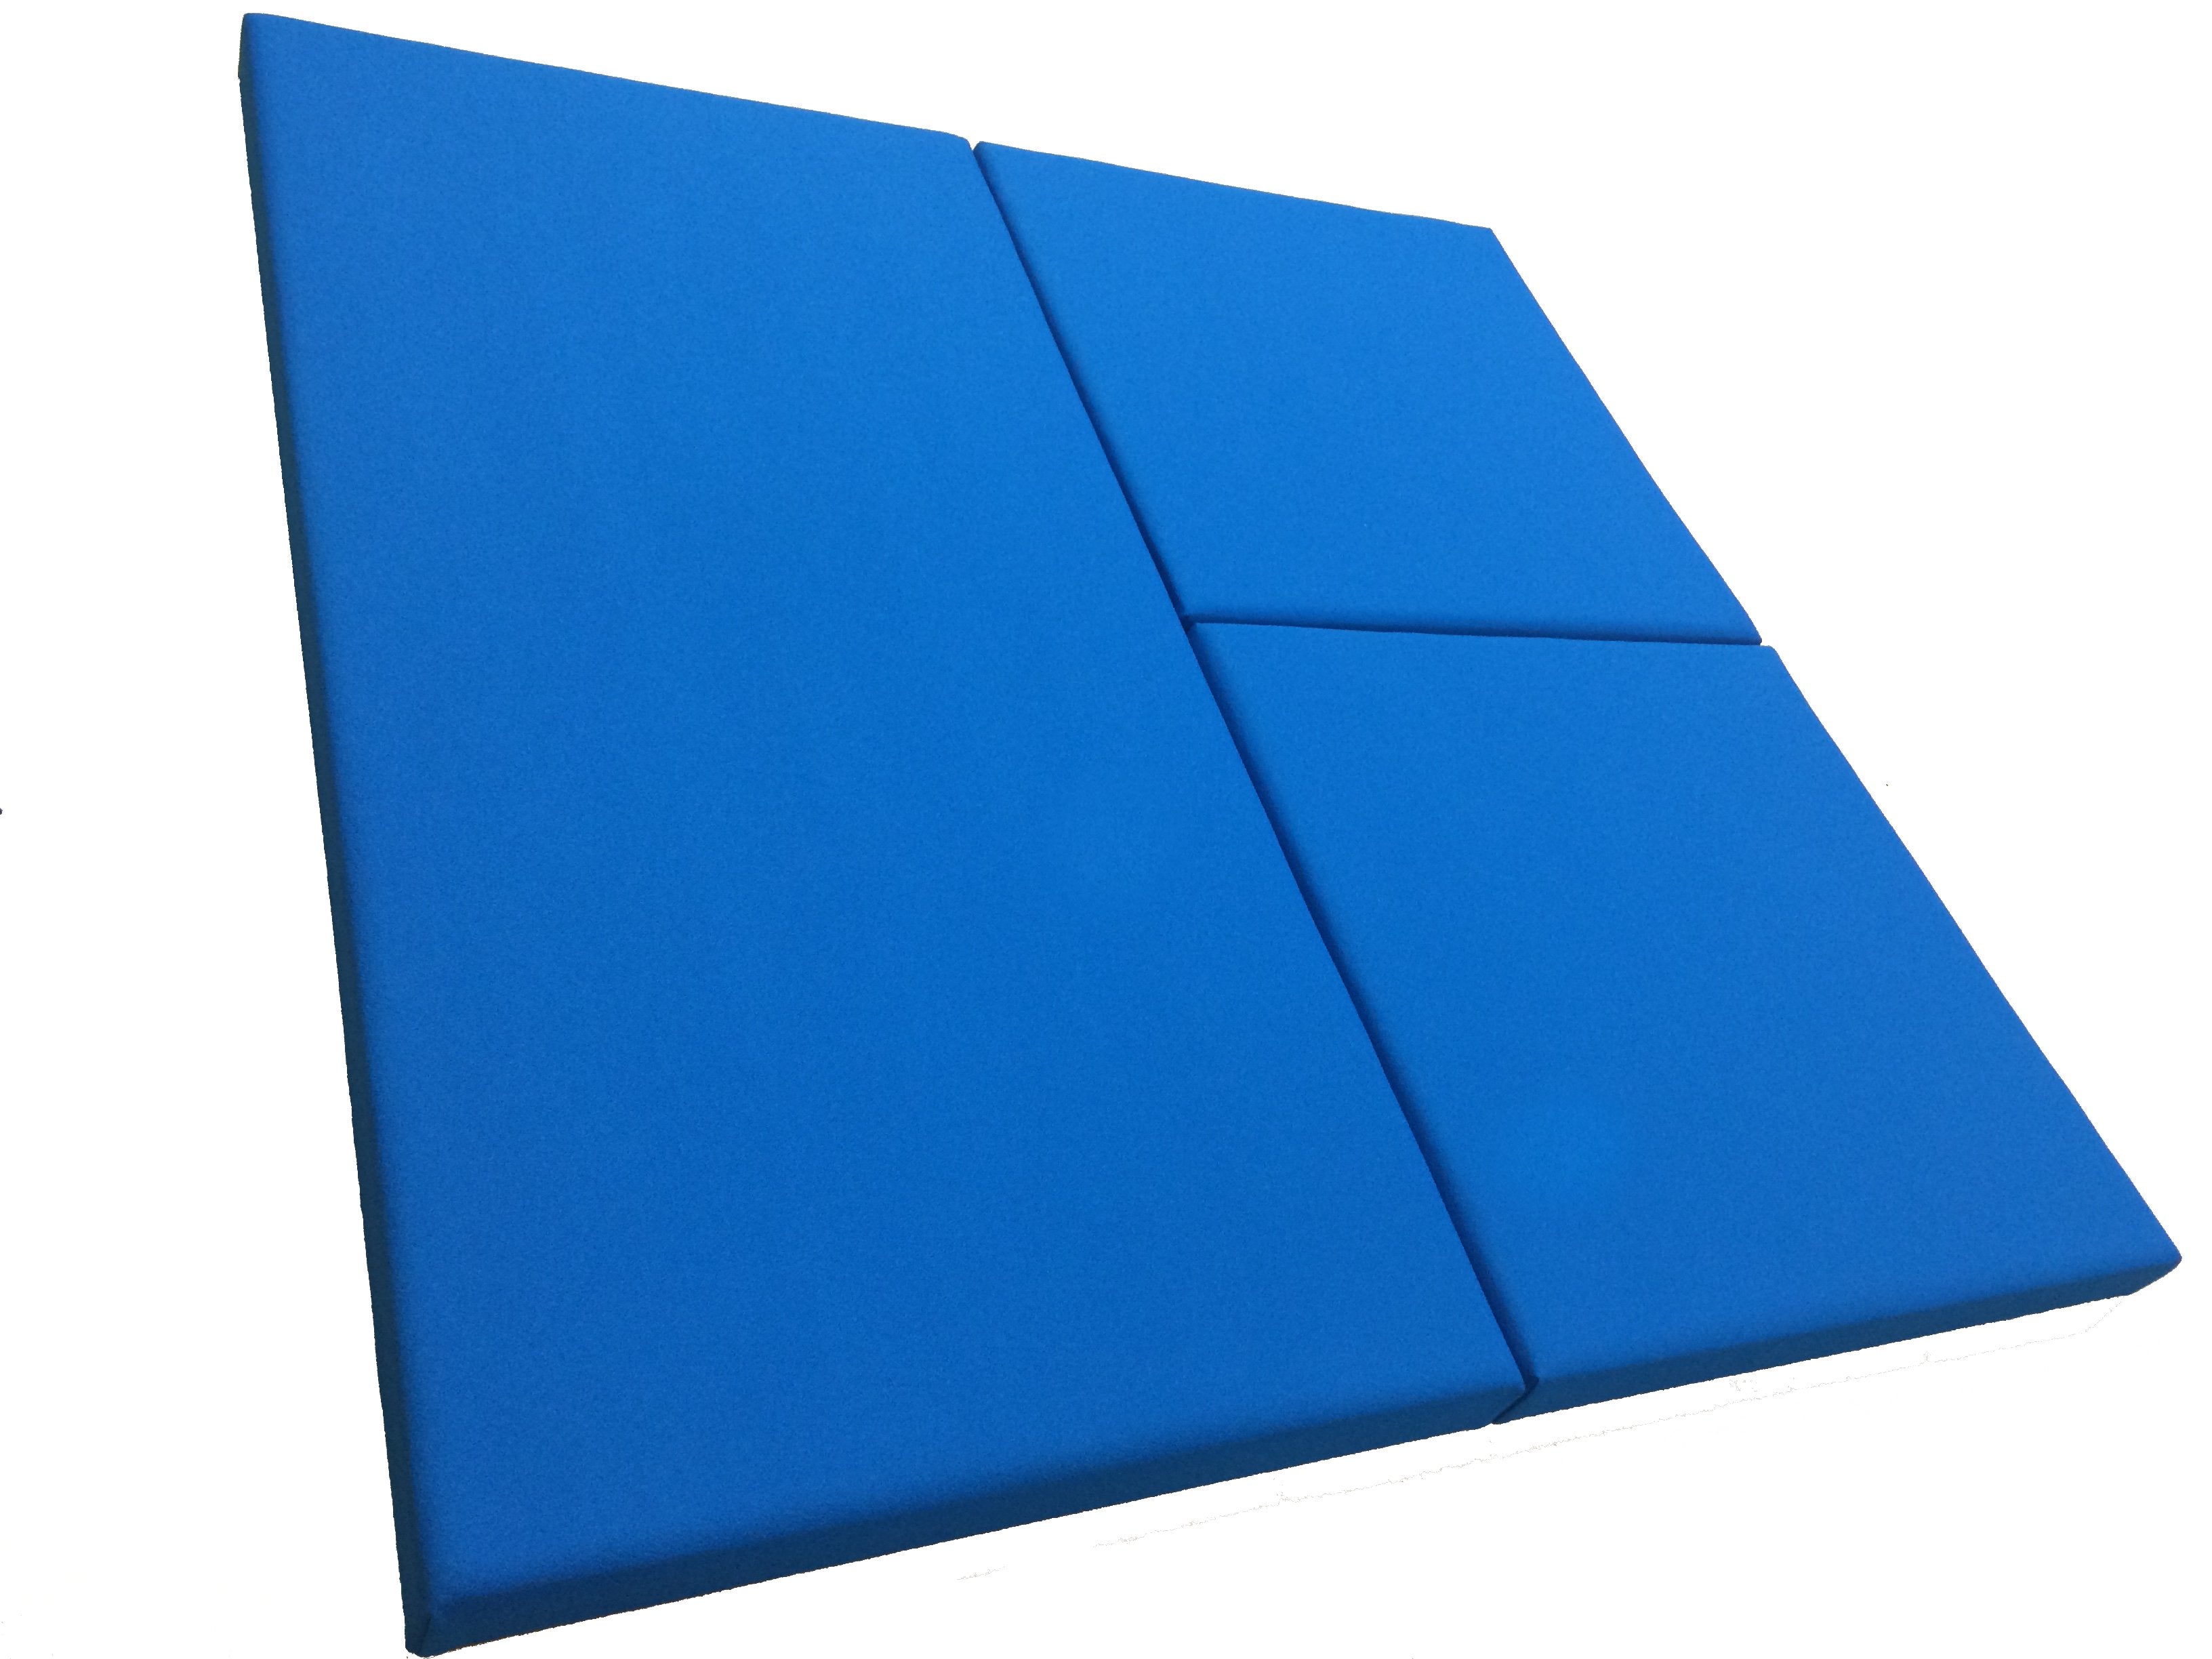 1" SoundControl Ceiling Mounted Acoustic Panel 2ft by 4ft - Advanced Acoustics